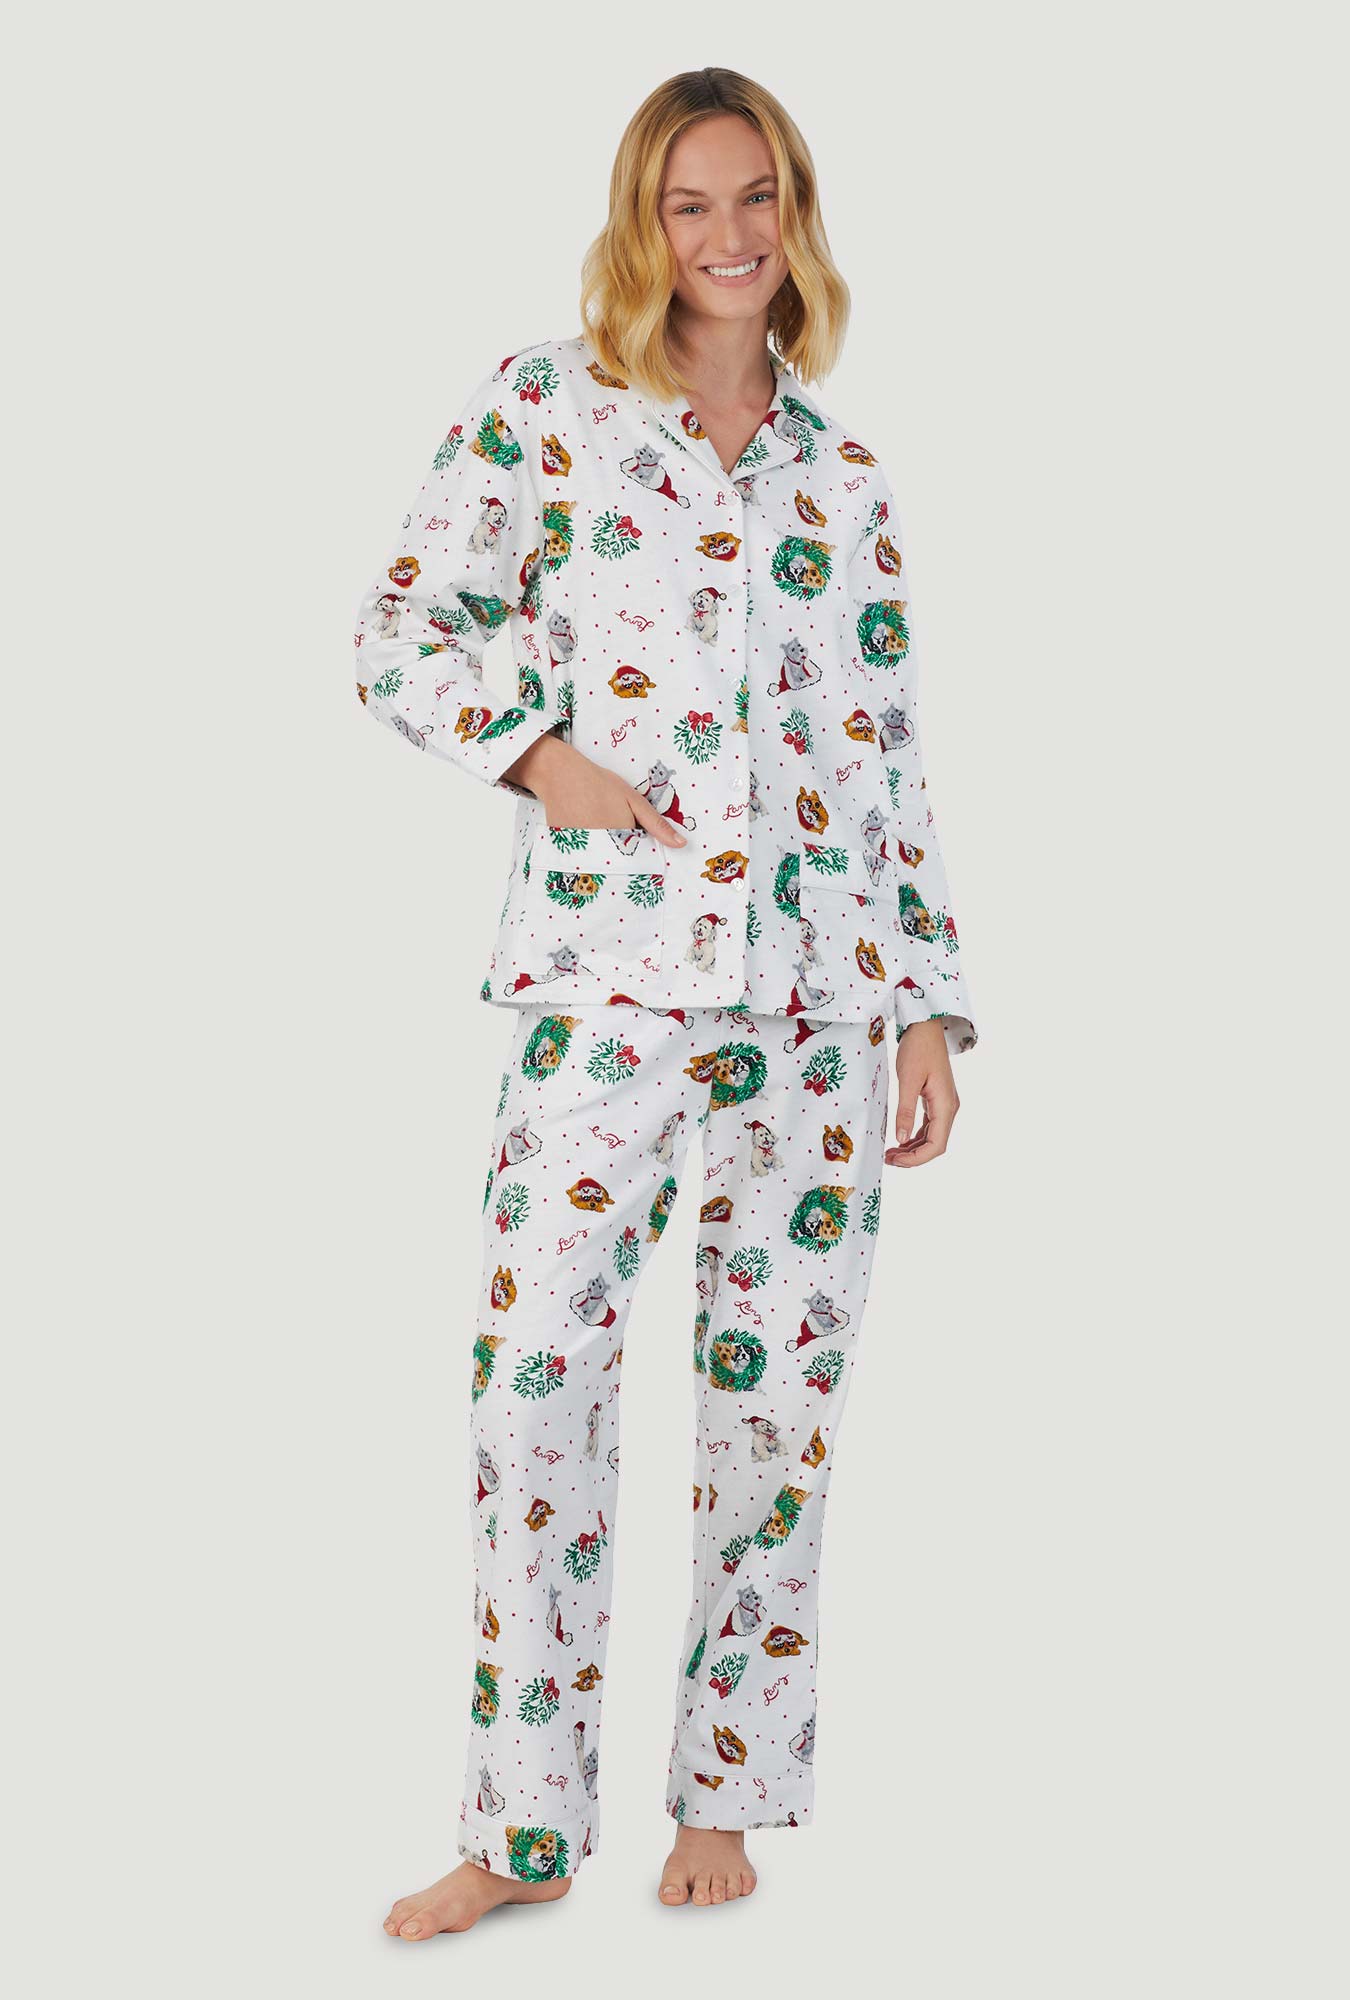 A lady wearing white long sleeve classic notch pajama with holiday puppies print.